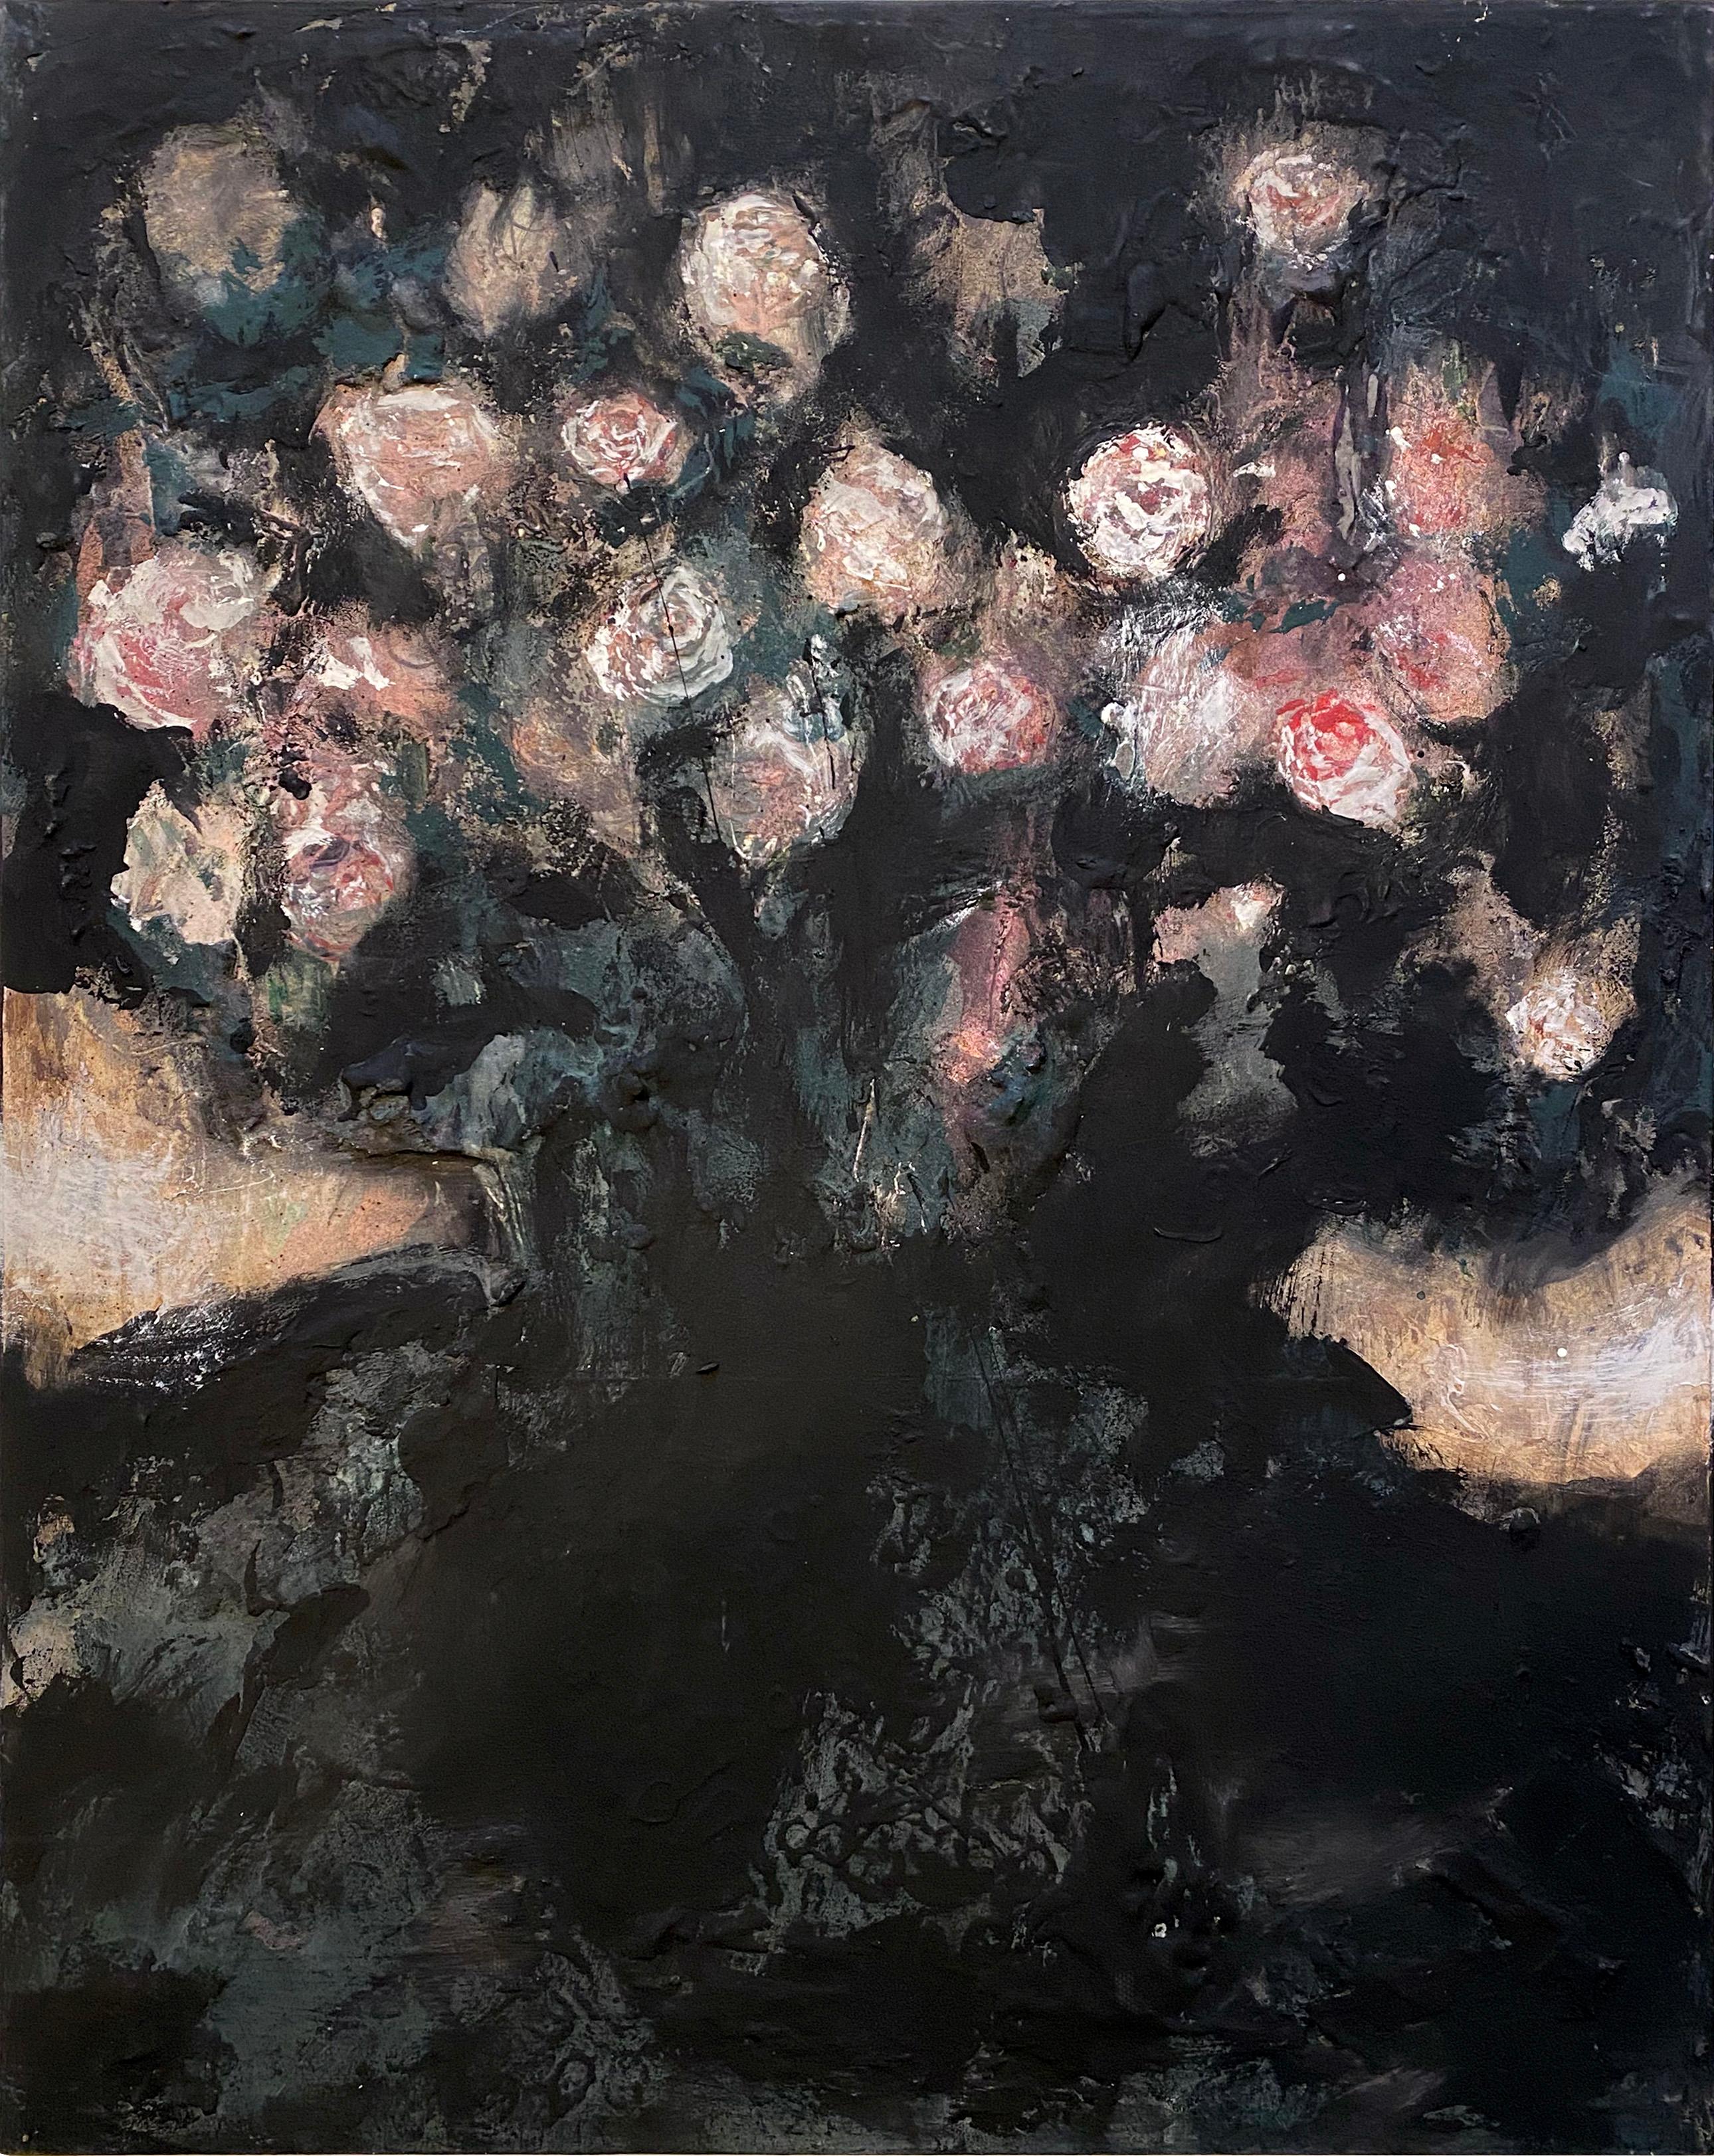 Nicholas Evans Abstract Painting - "Night Bouquet" (Abstract, Calm, Black, Pink Roses, Floral Painting on Wood) 